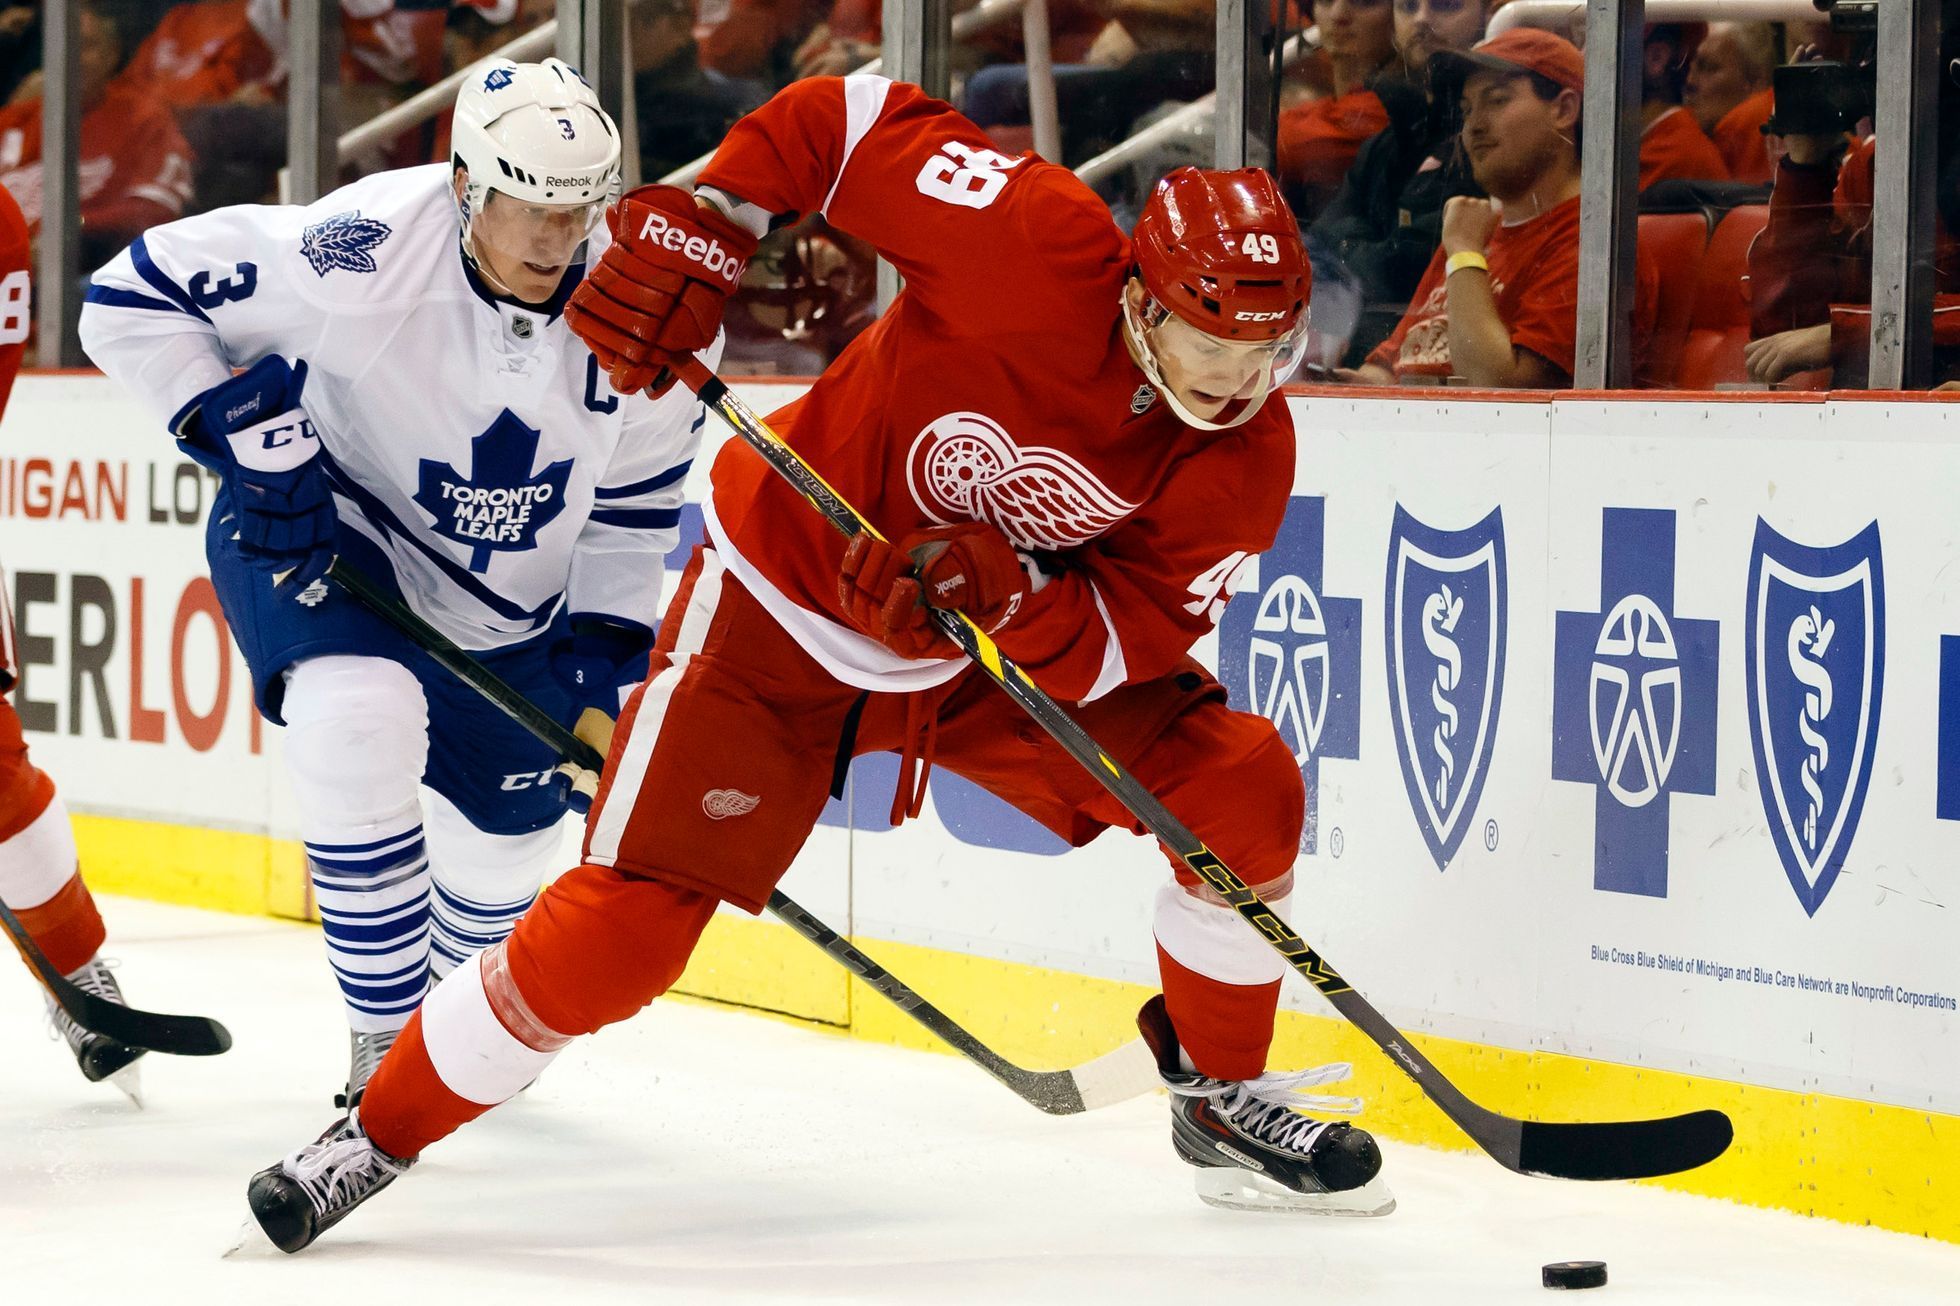 NHL: Toronto Maple Leafs vs. Detroit Red Wings (Nestrašil, Dion Phaneuf)